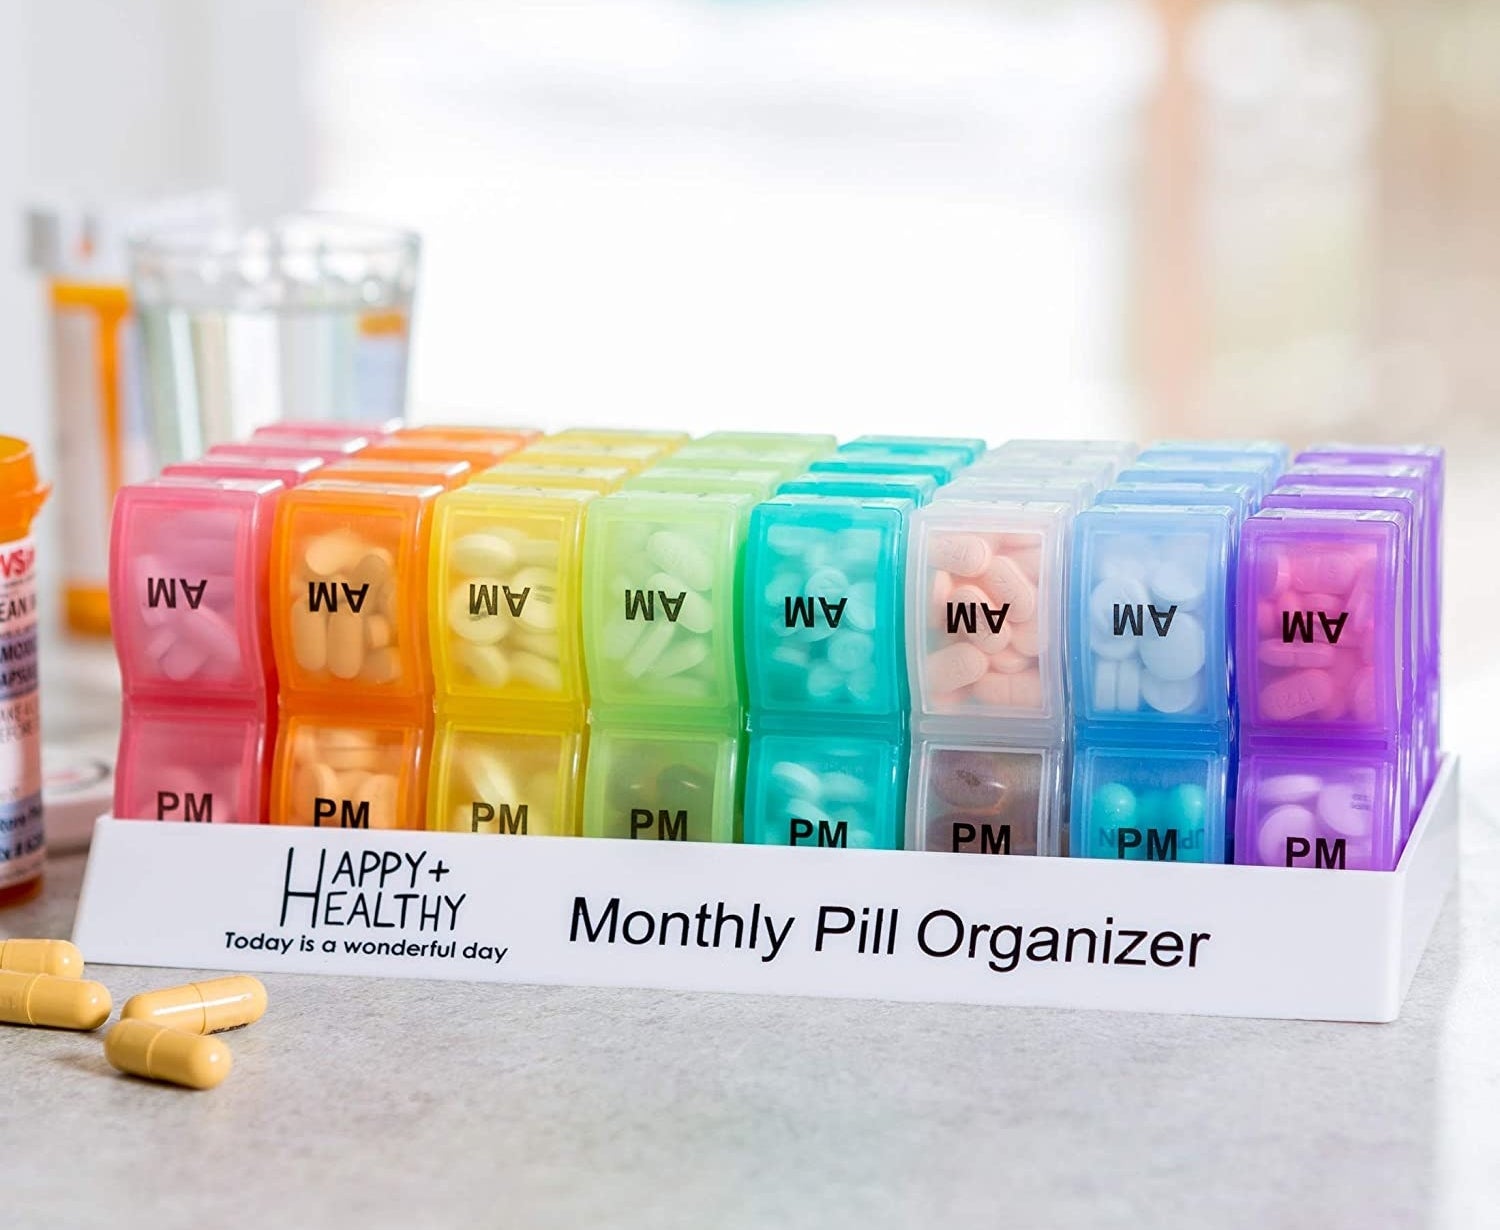 The monthly pill organizer filled with capsules